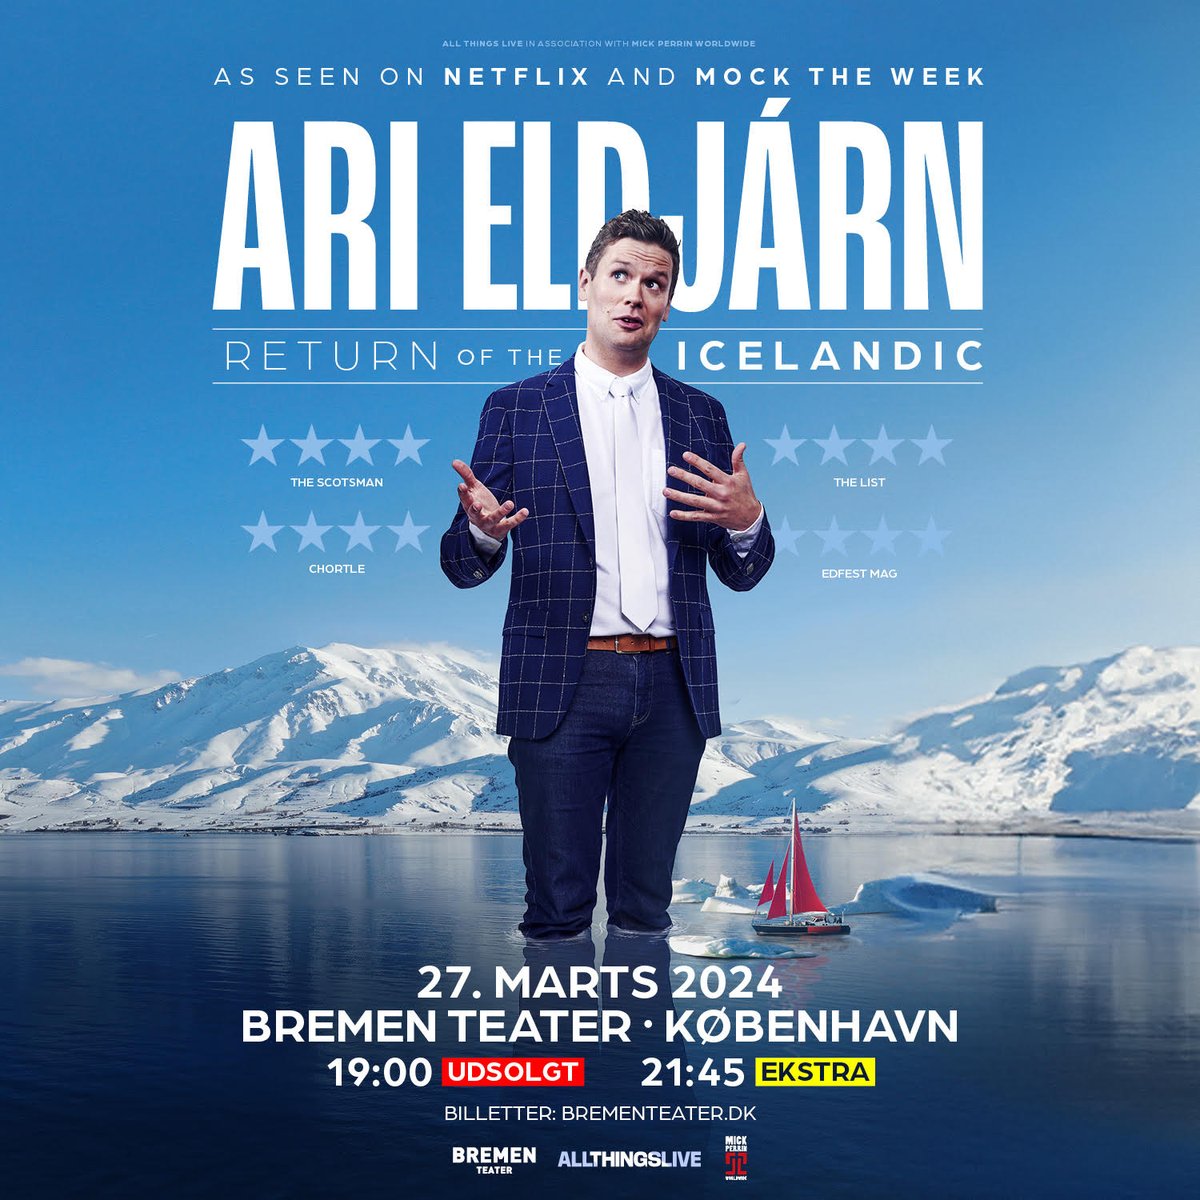 📢 Extra show added in Copenhagen! 📢 Same venue, same night, later time! TICKET LINK: ticketmaster.dk/event/BRM2703E #arieldjárn #standup #standupcomedy #comedy #iceland #allthingslive